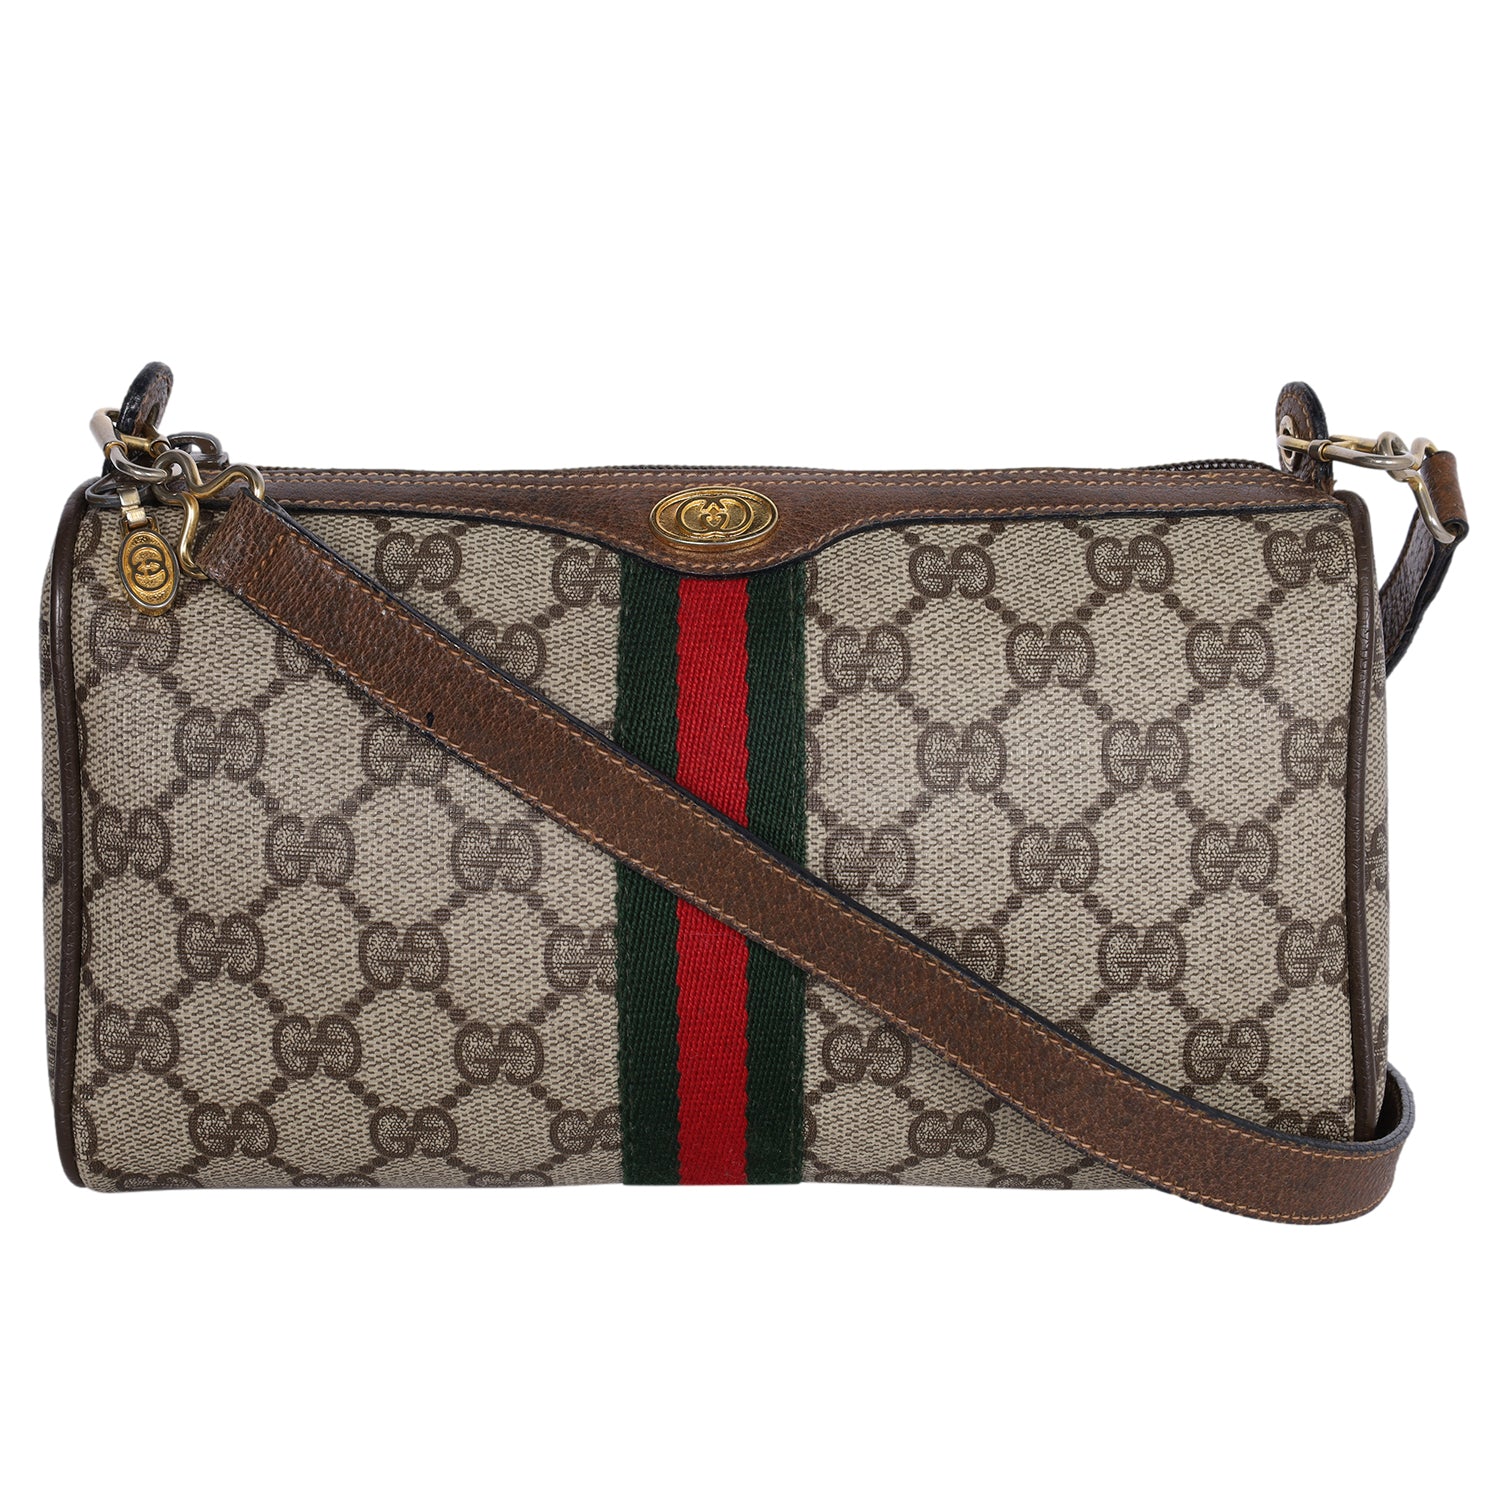 Authentic Gucci crossbody bag preowned